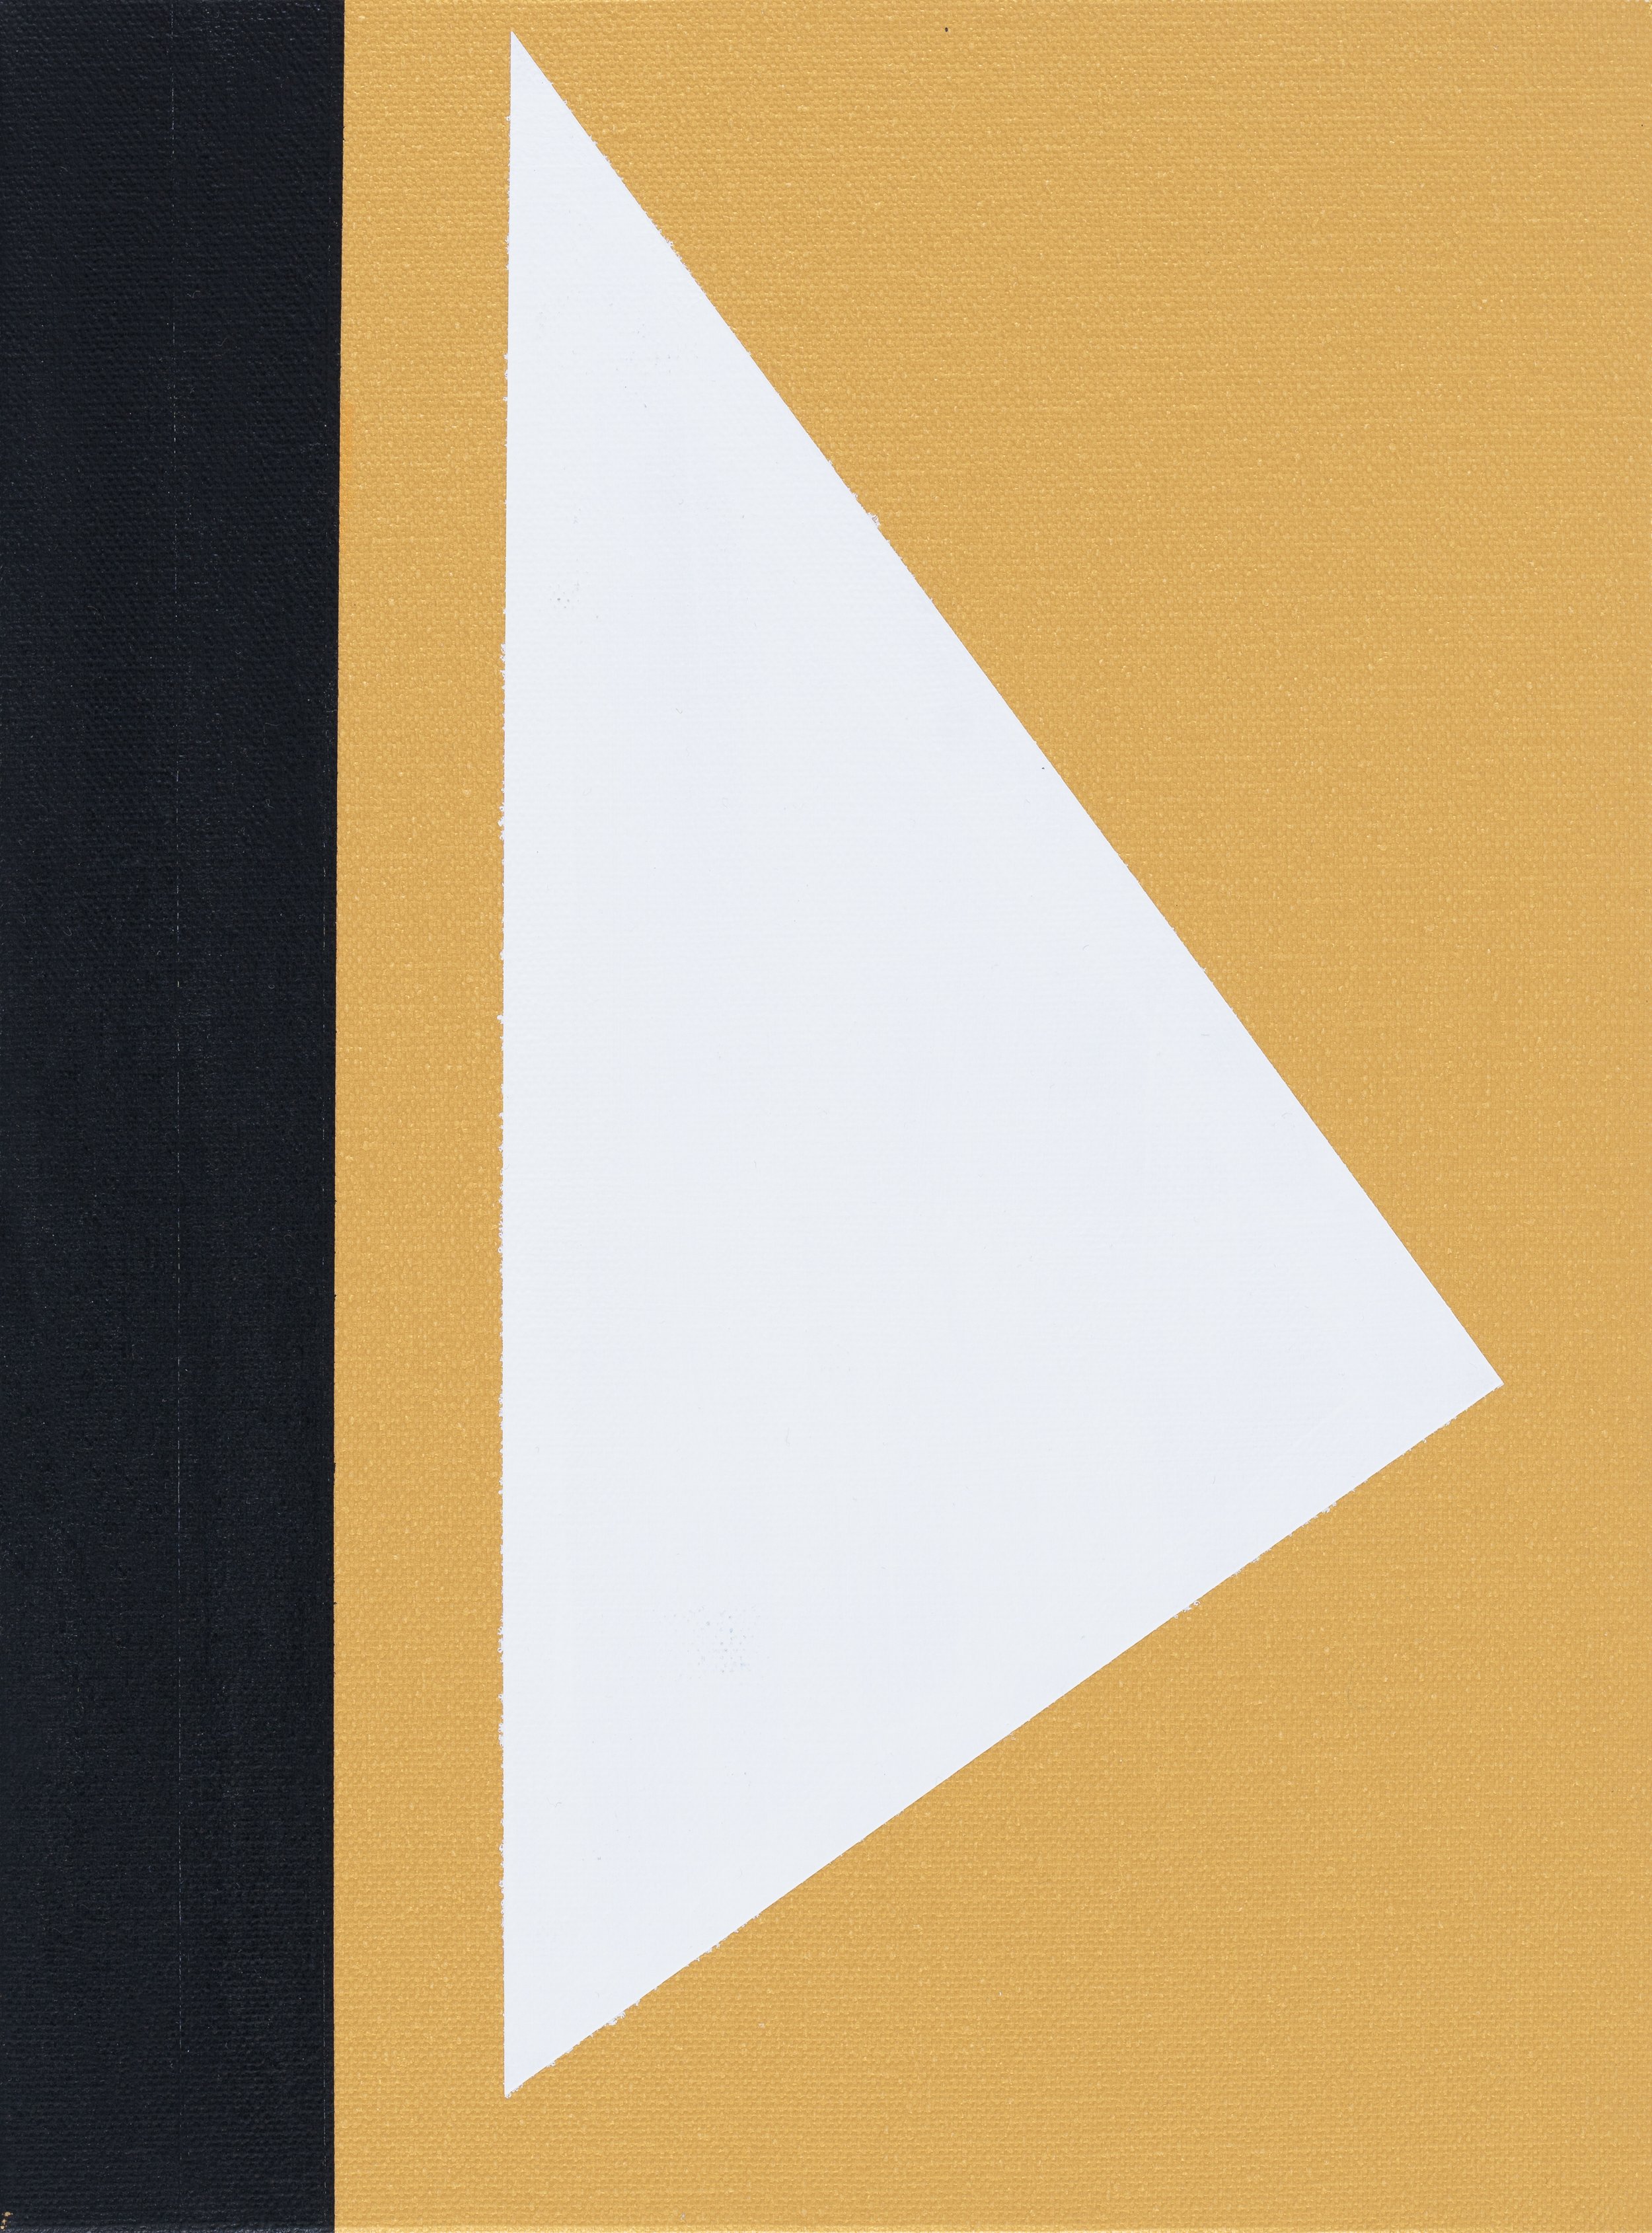 Metallic Gold and Black, 2022, acrylic on canvas, 12x9 inches